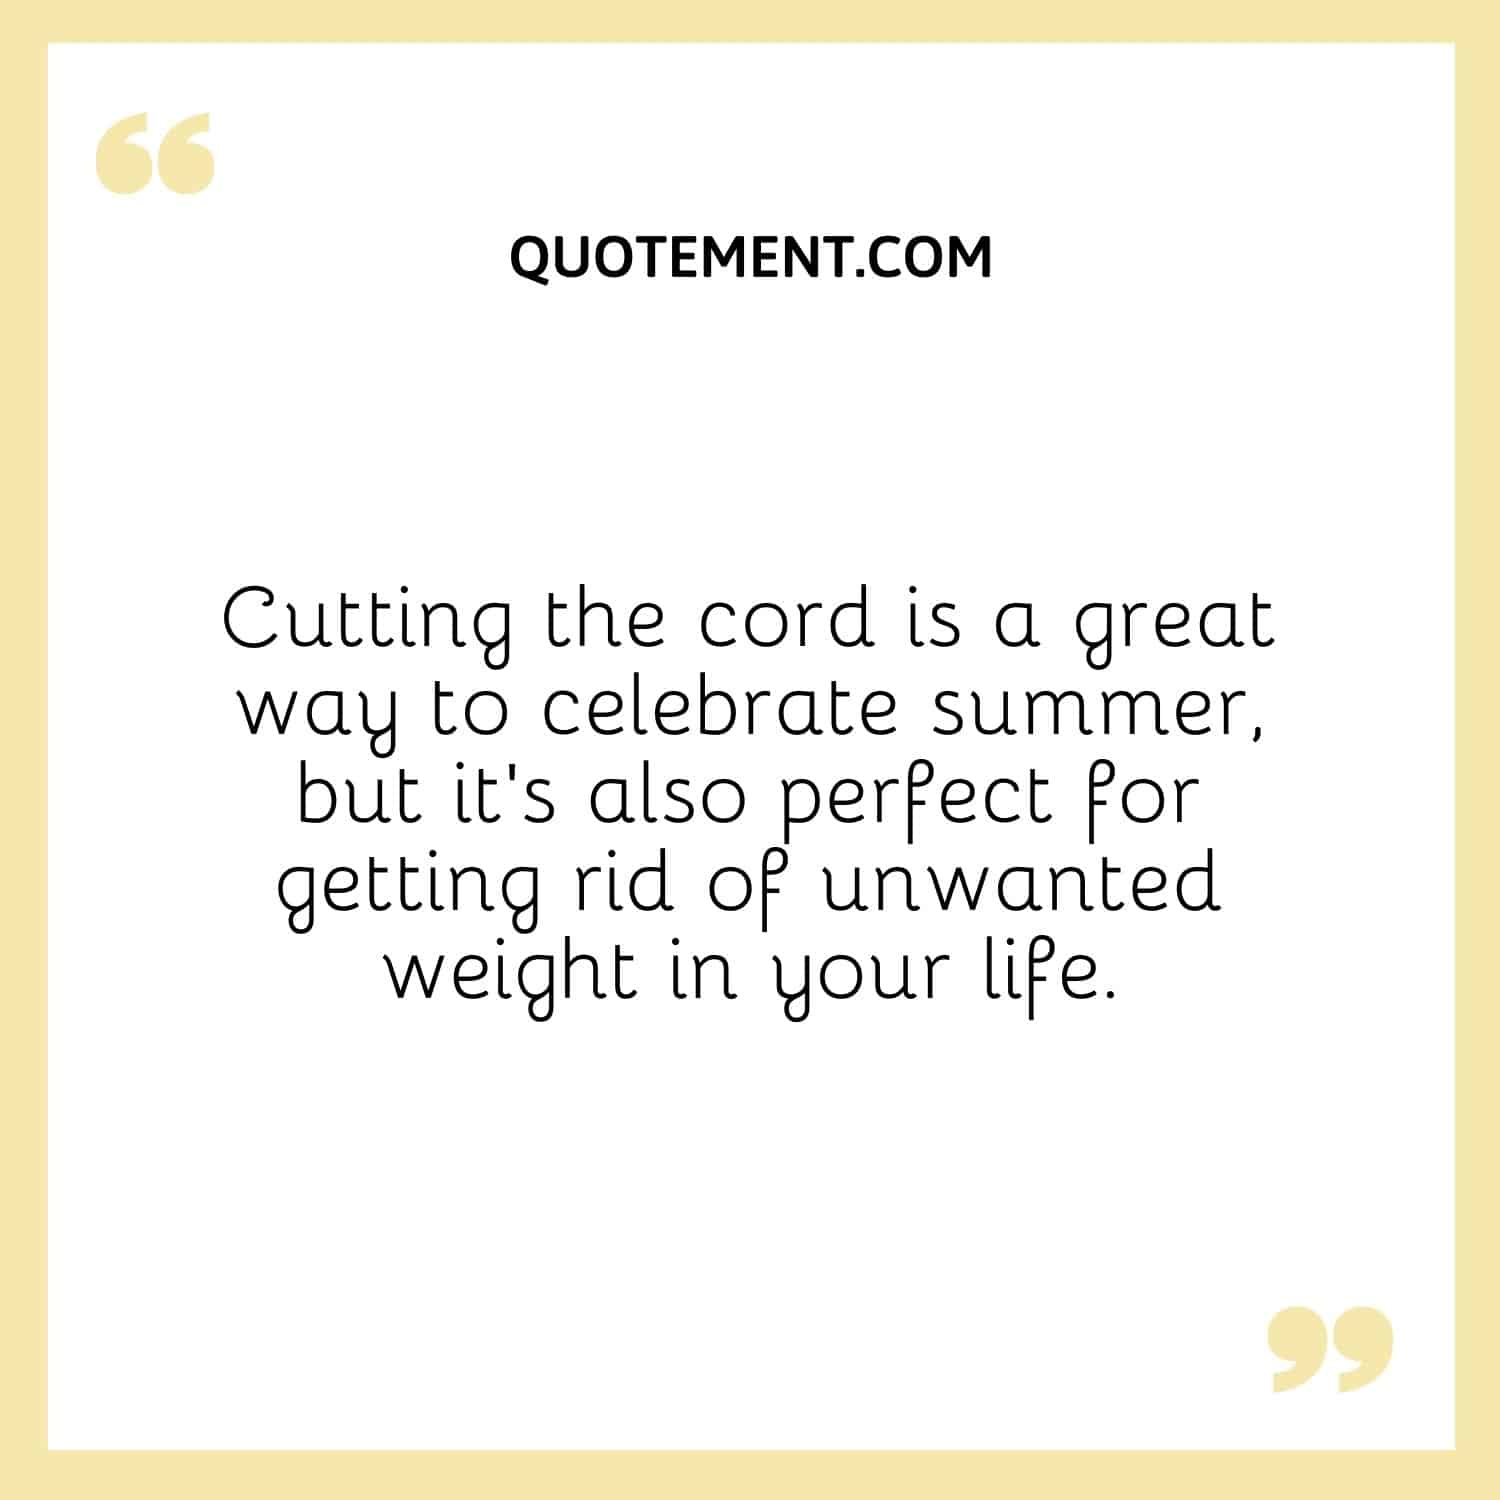 Cutting the cord is a great way to celebrate summer, but it's also perfect for getting rid of unwanted weight in your life.